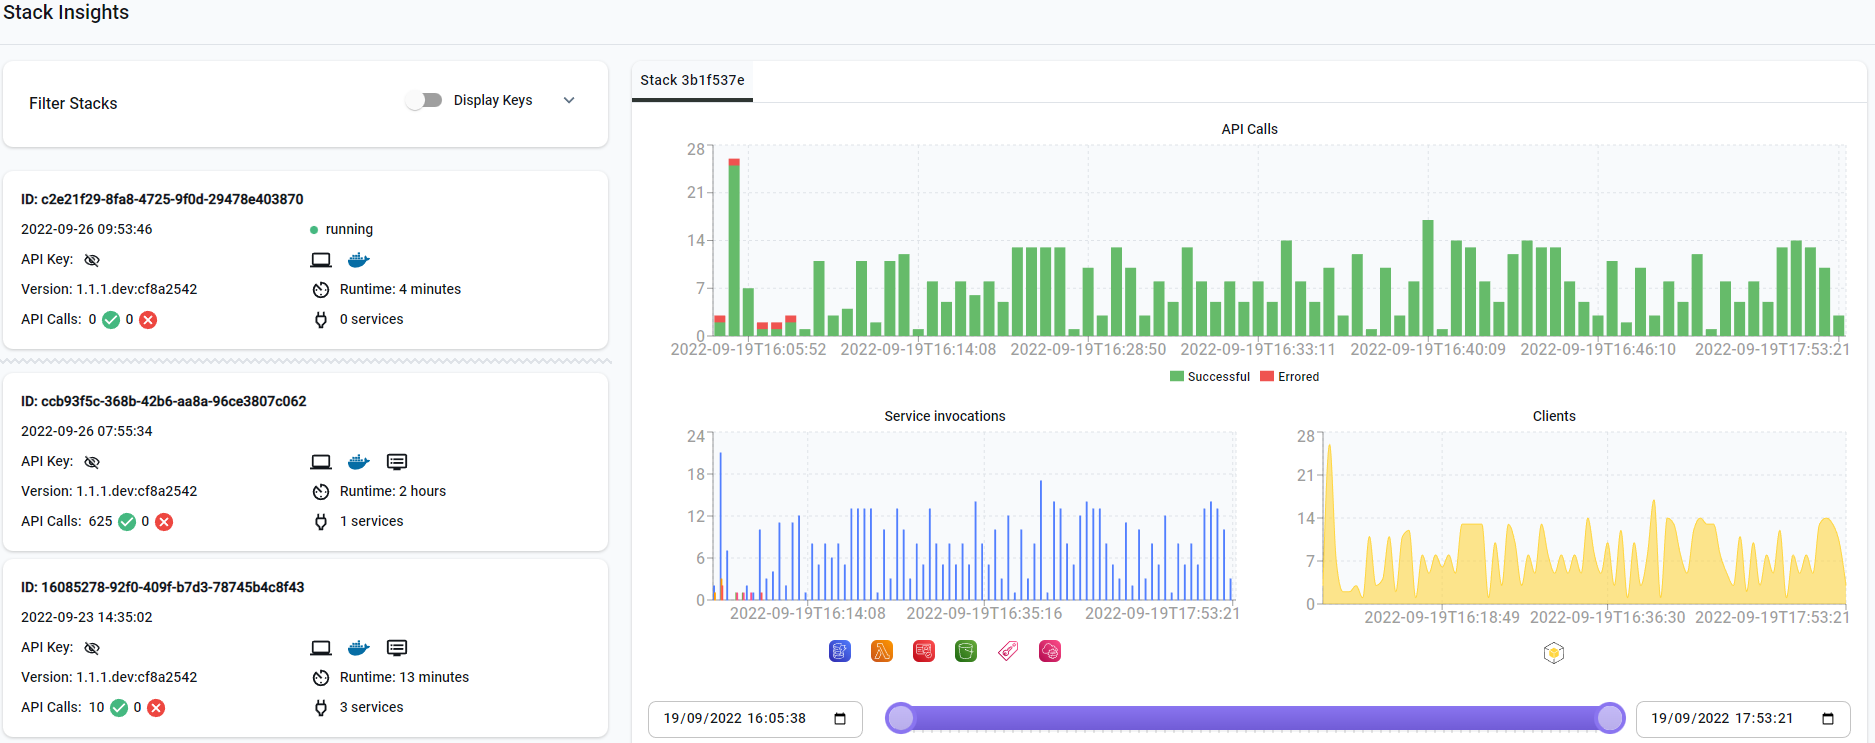 Detailed Stack Insights